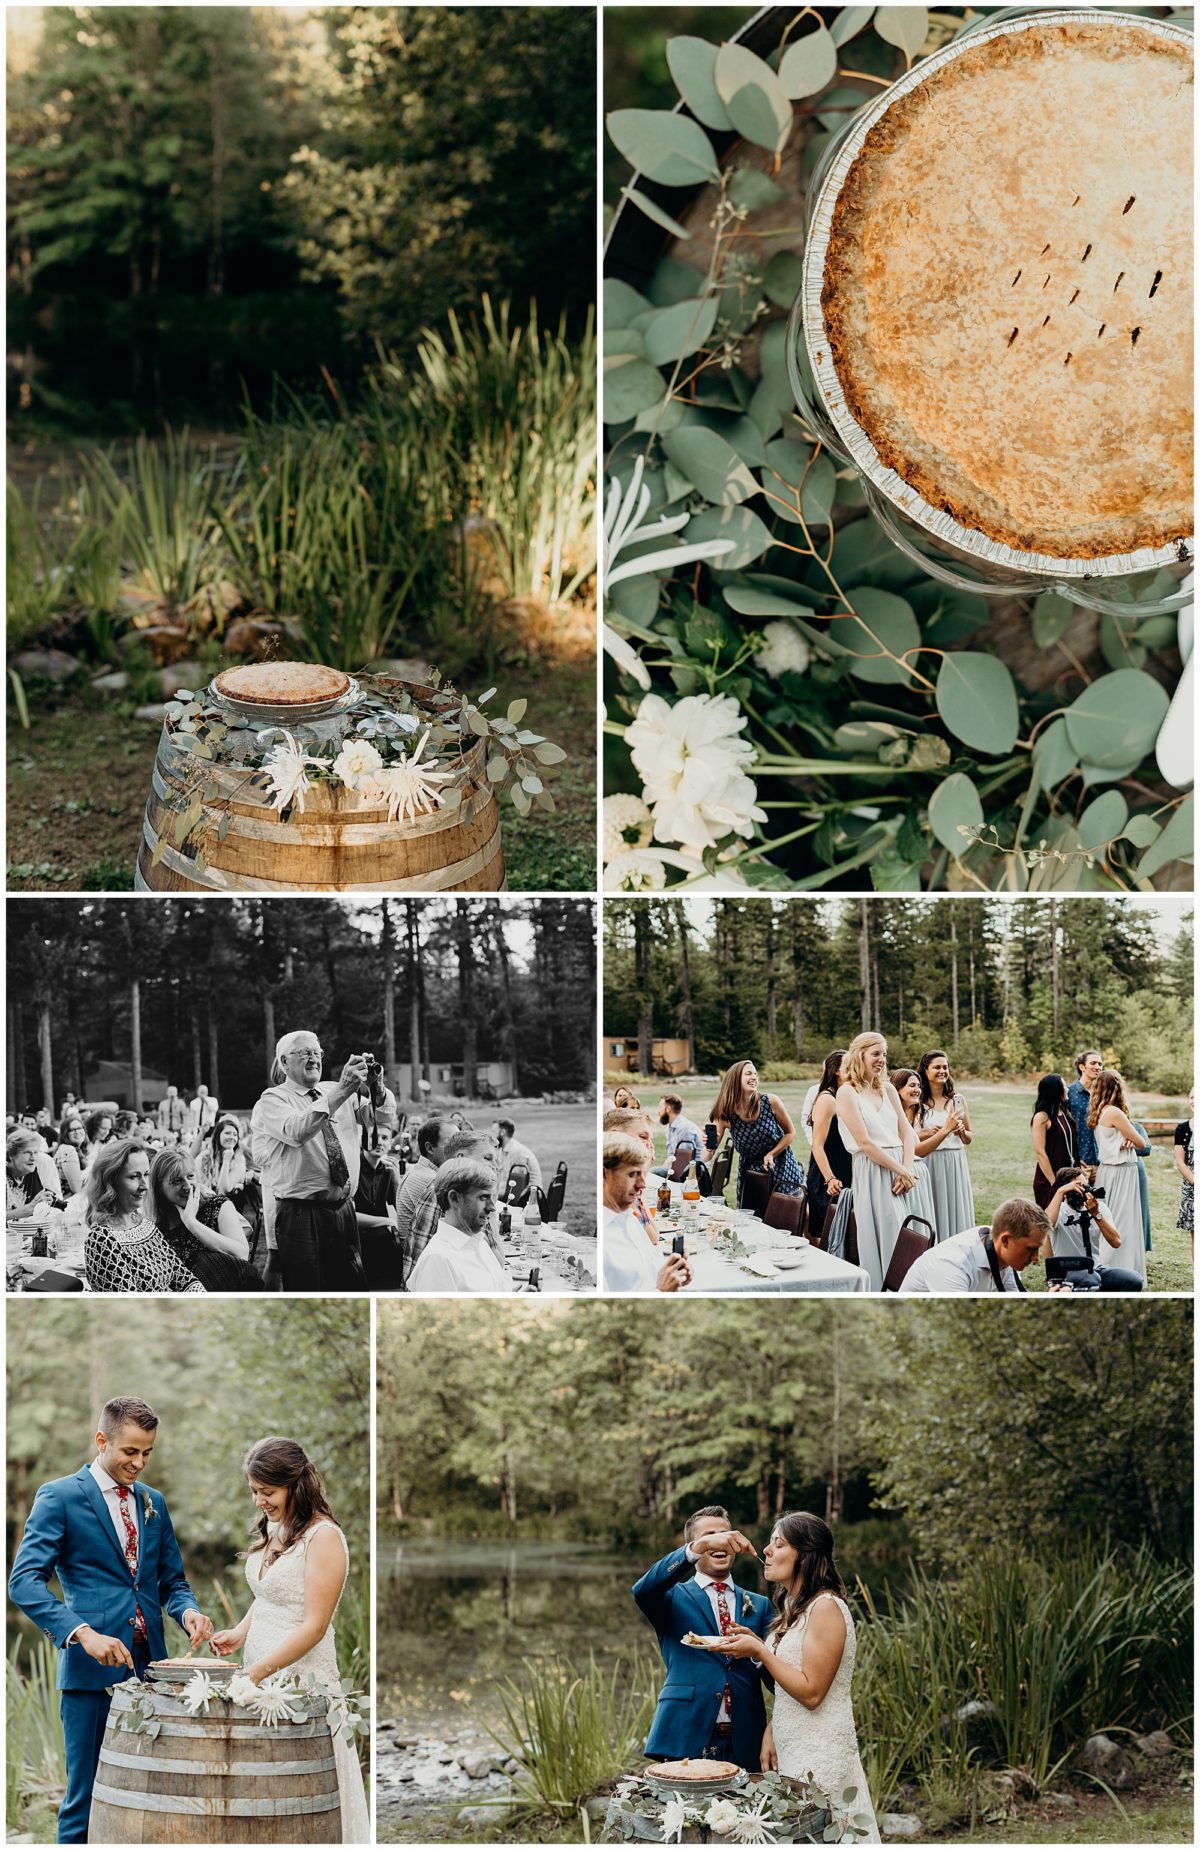 Wedding pie ceremony at this summer camp themed wedding in Lyons, Oregon. Photography by PNW wedding photographer, Briana Morrison